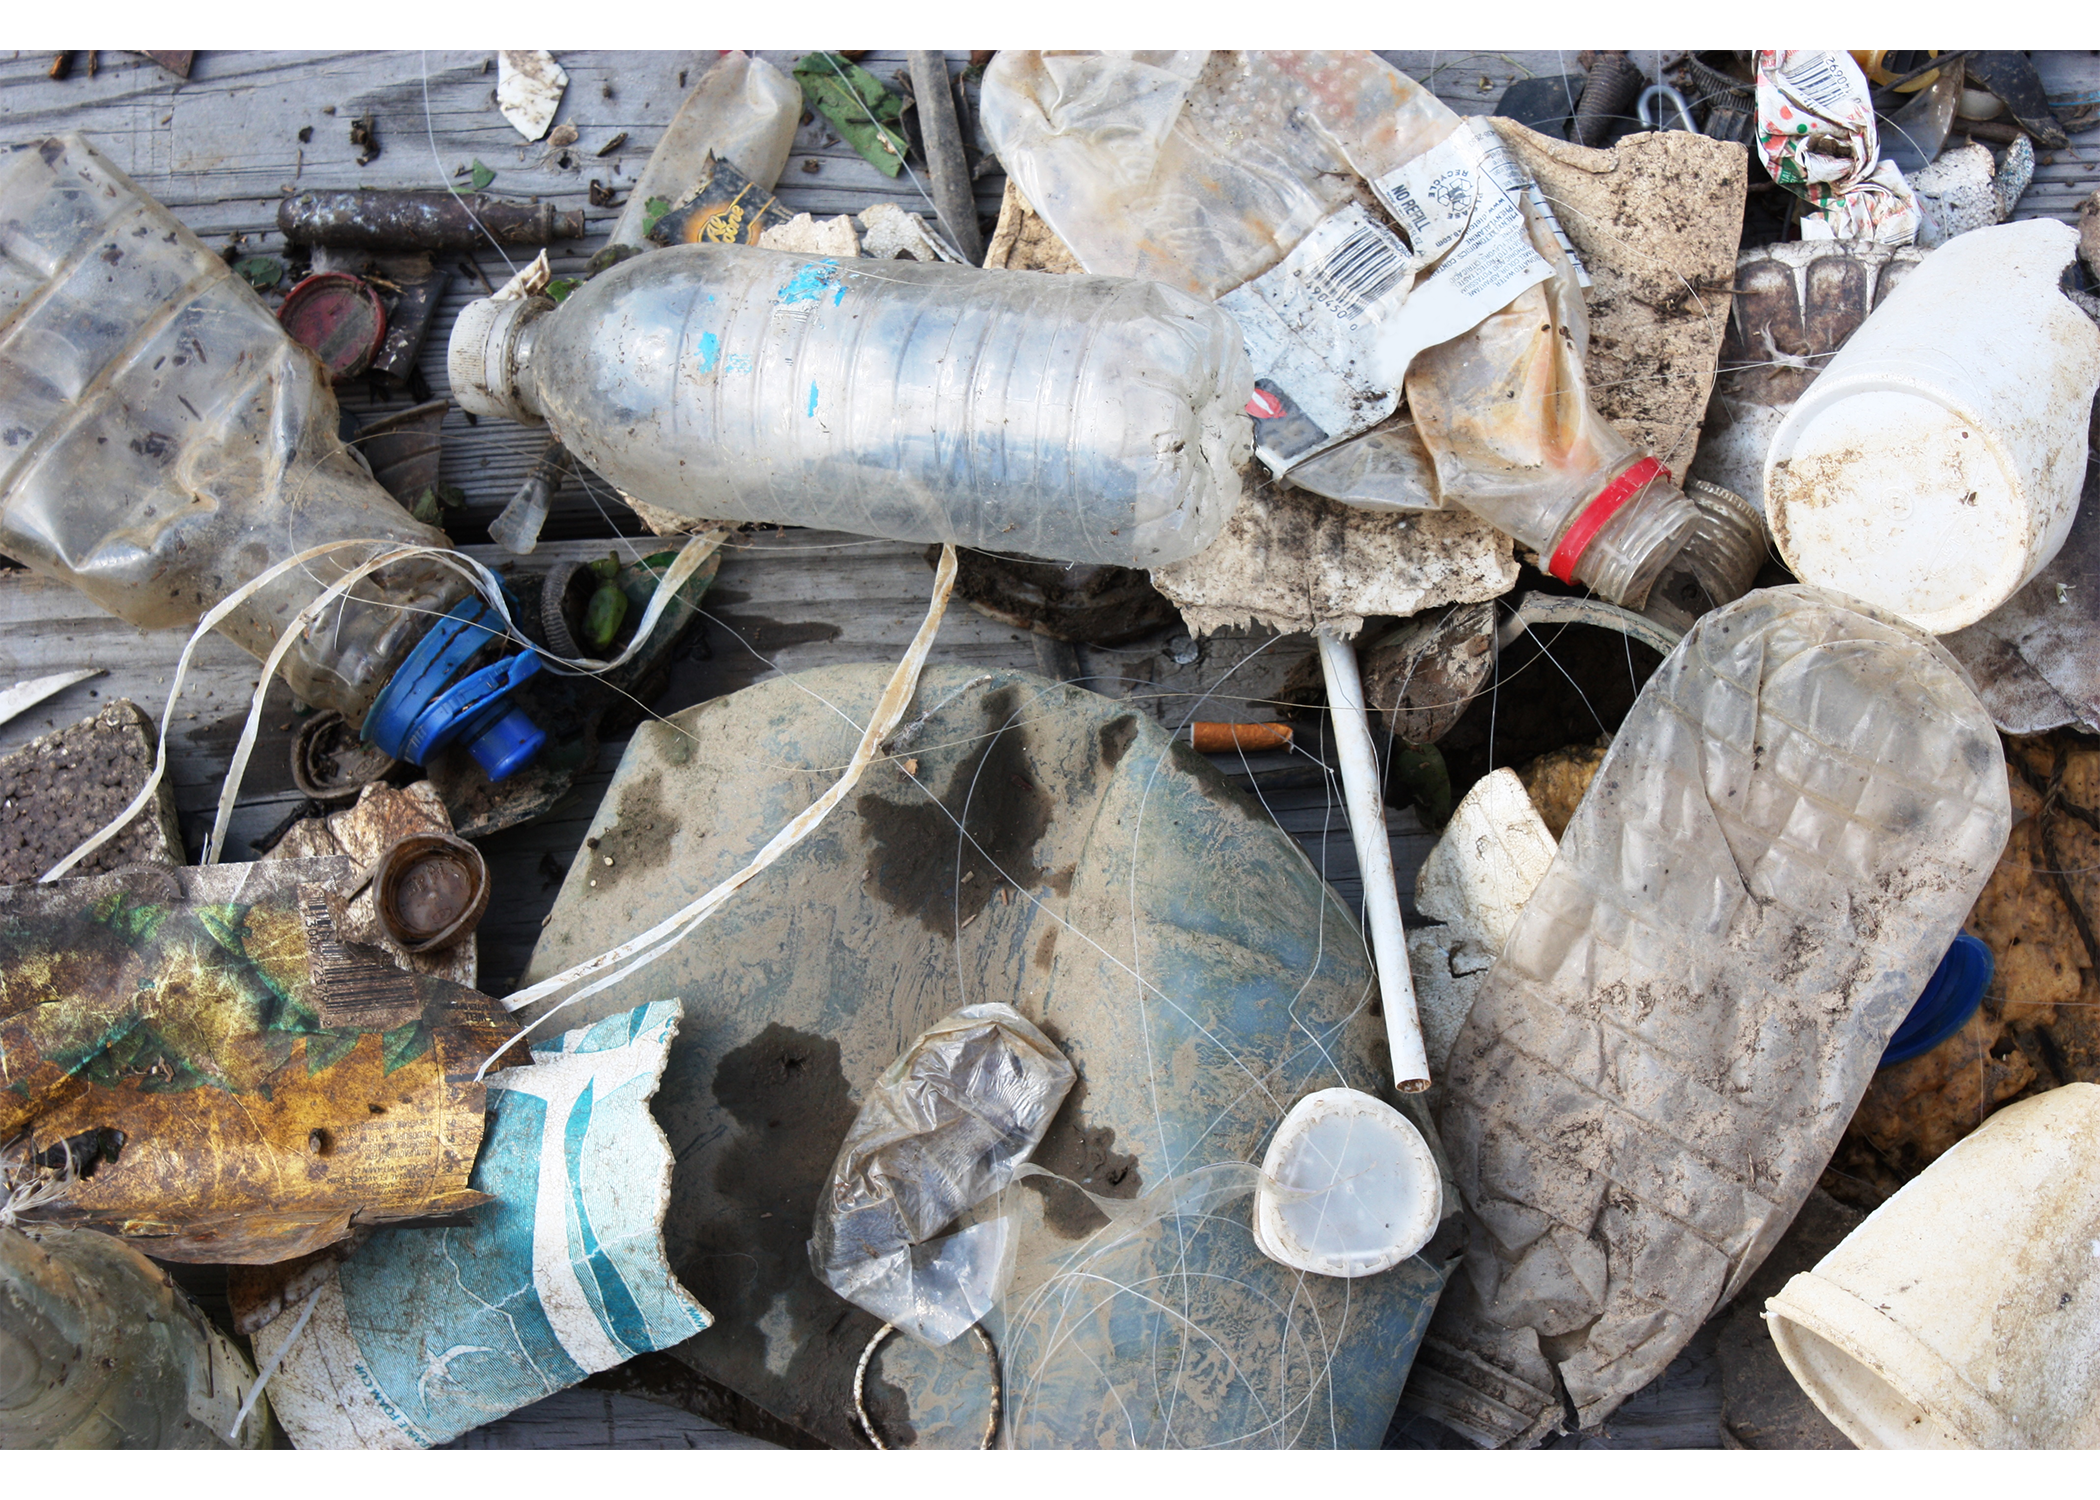 A pile of debris including plastic bottles, fishing line, and packaging.